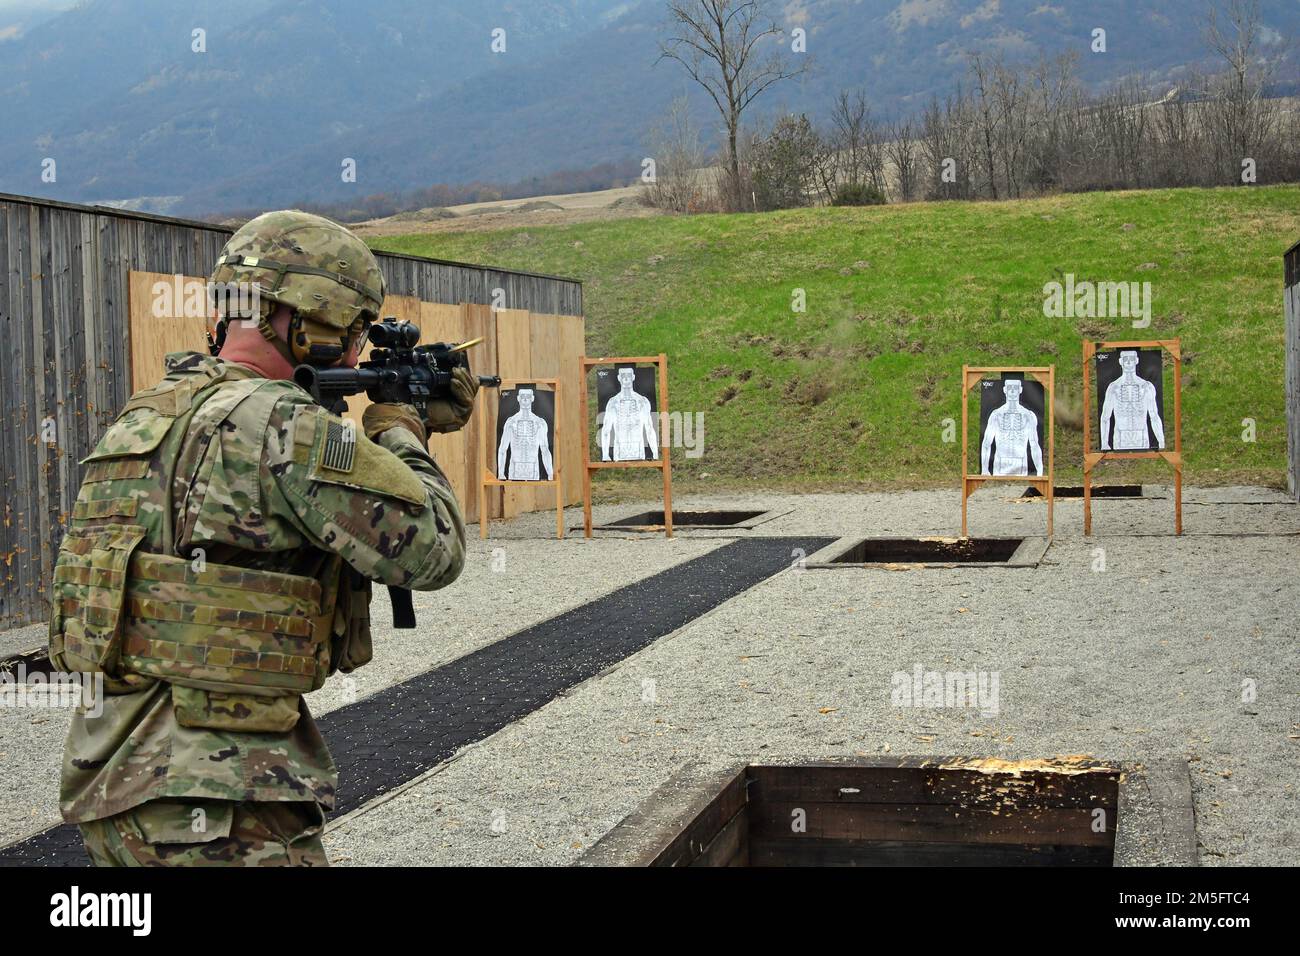 A U.S. Army Paratrooper, assigned to the 1st Battalion, 503rd Infantry Regiment, 173rd Airborne Brigade, engages targets with an M4 carbine during marksmanship training at Cao Malnisio Range, Pordenone, Italy, March 15, 2022. The 173rd Airborne Brigade is the U.S. Army’s Contingency Response Force in Europe, providing rapidly deployable forces to United States European, African, and Central Command areas of responsibility. Stock Photo